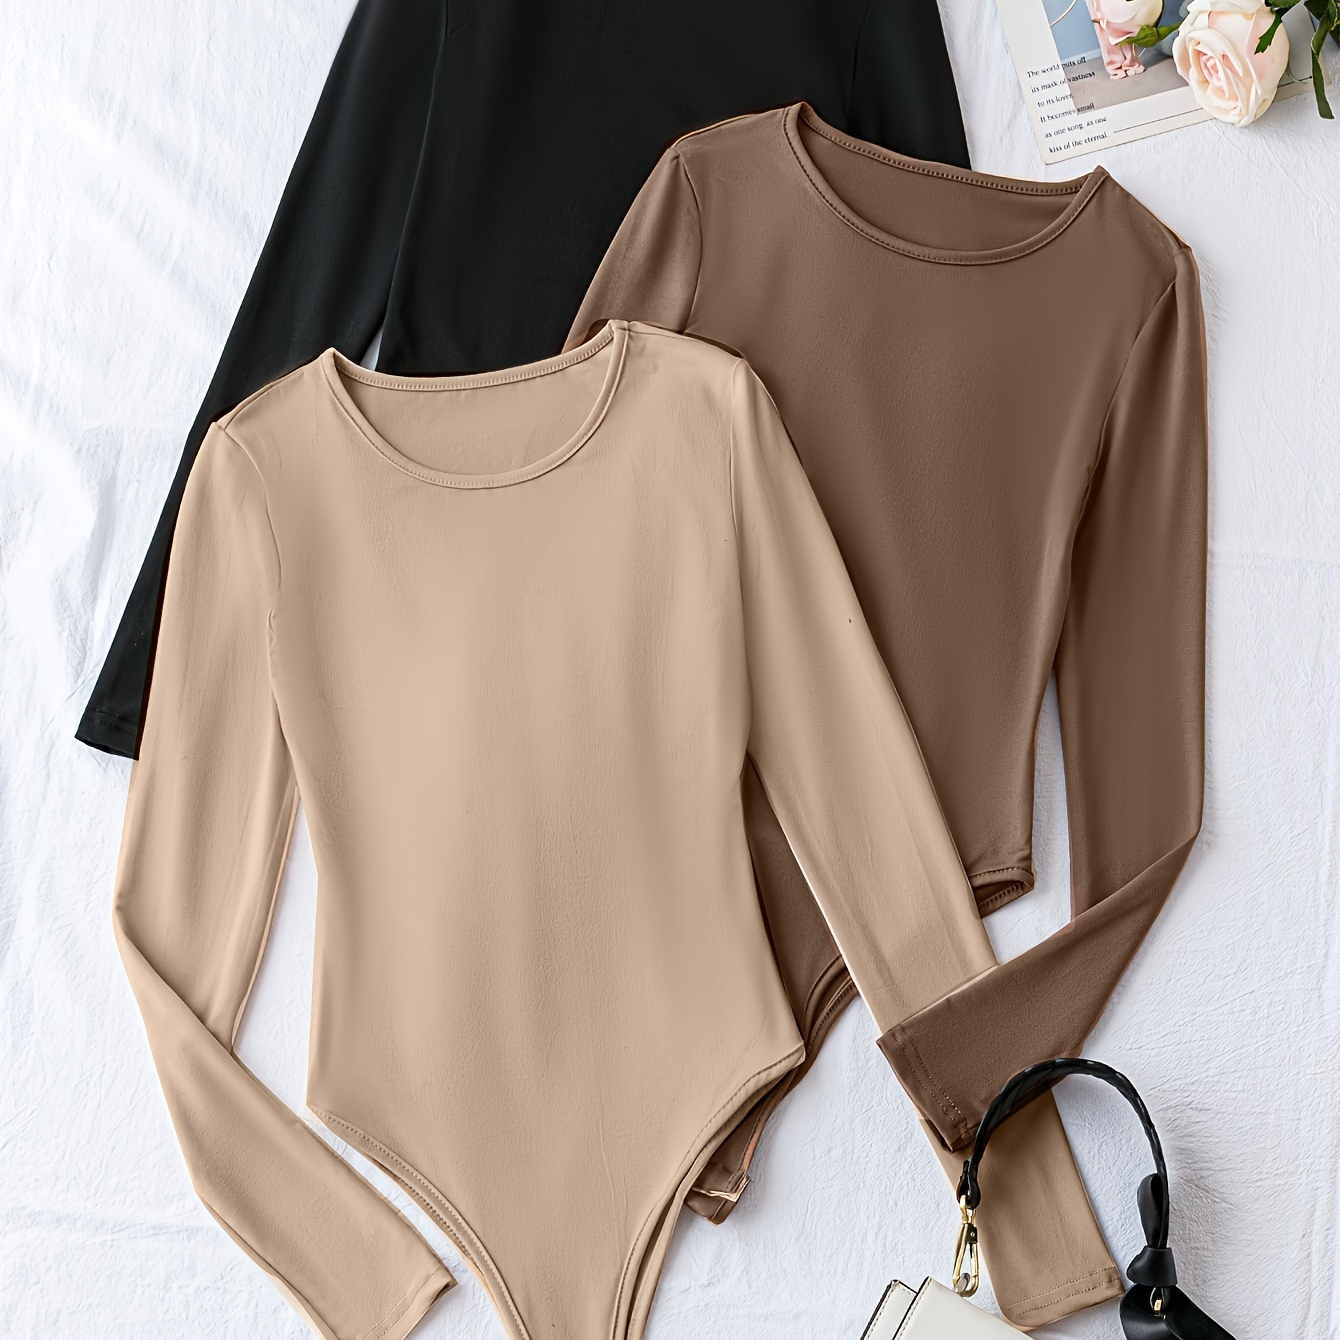 Solid Crew Neck Bodysuit 3 Pack, Casual Long Sleeve One-Piece Bodysuit, Women'S Clothing